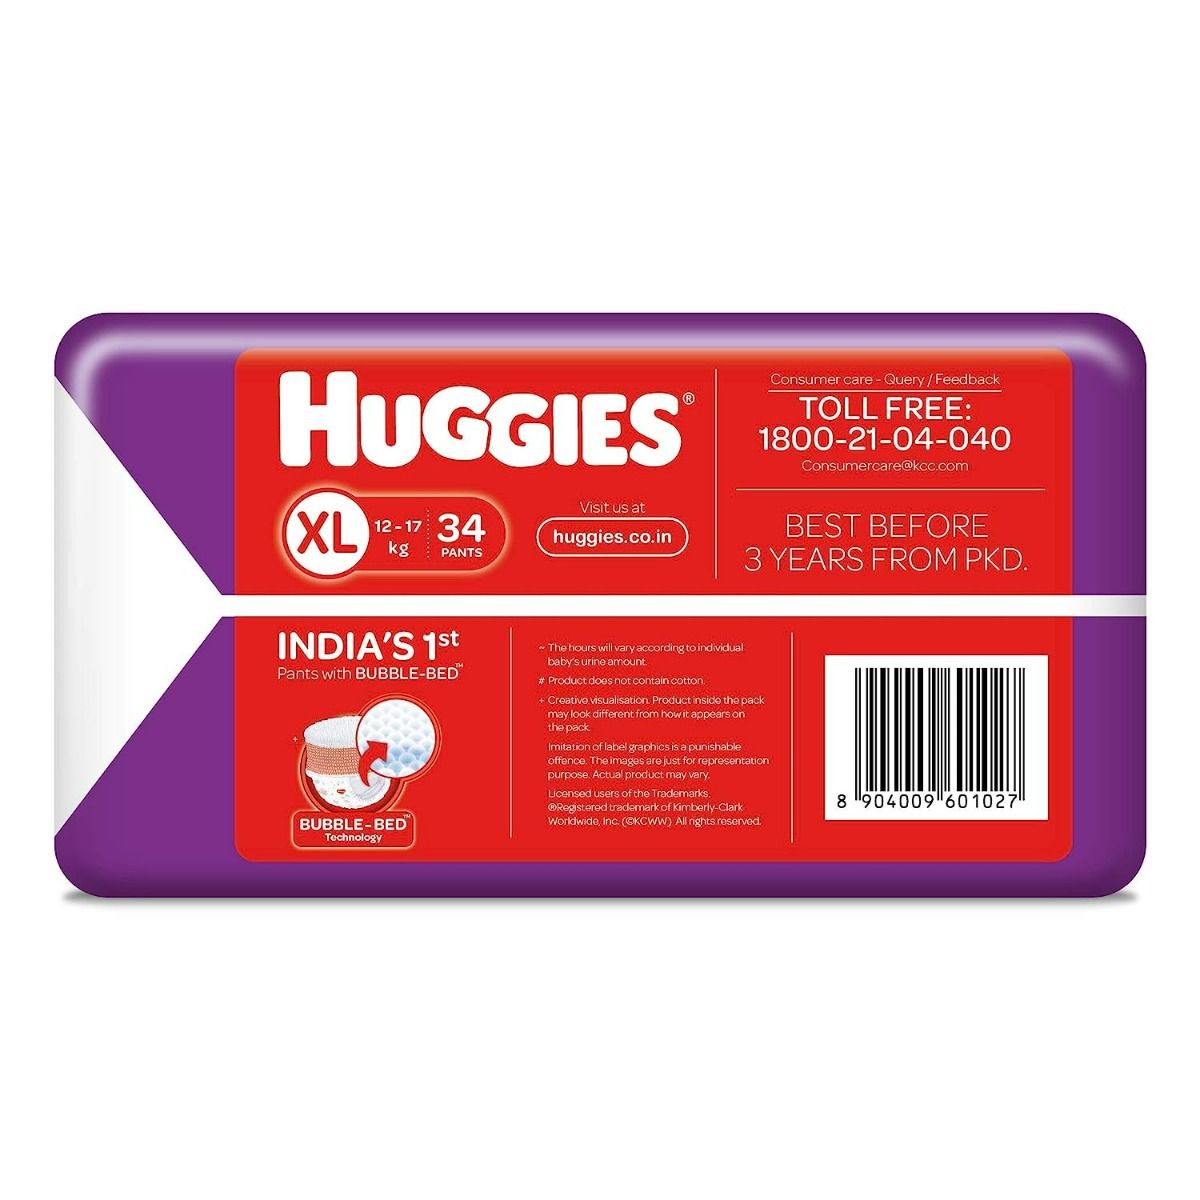 Huggies Complete Comfort Wonder Pants Newborn / Extra Small (Nb/Xs) Size  (Up To 5 Kg) Baby Diaper Pants,90 Count,India'S Fastest Absorbing Diaper  With Upto 4X Faster Unique Dry Xpert Channel Baby Care -